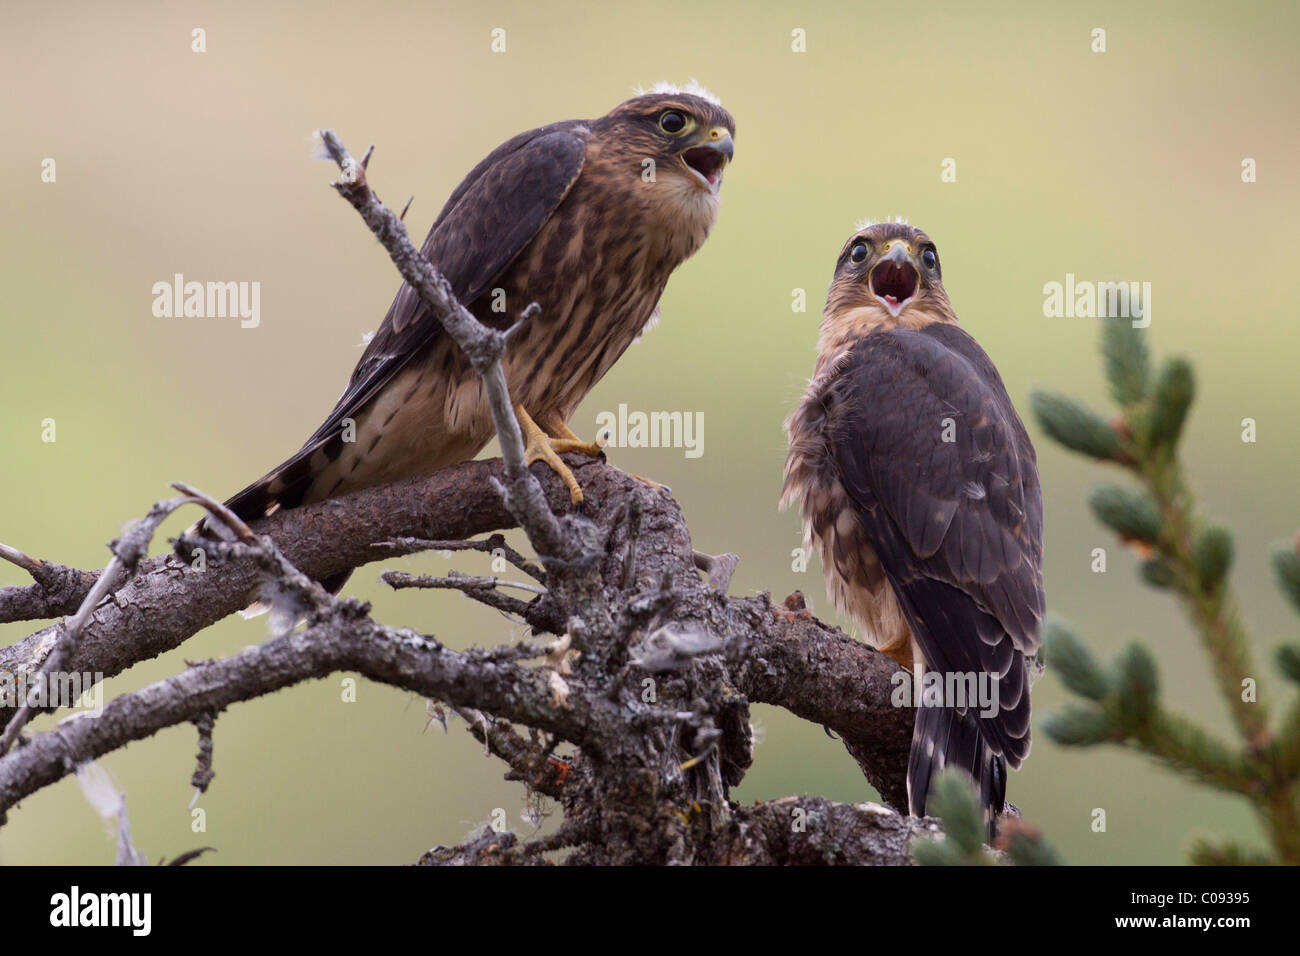 A pair of Merlins (pigeon hawks) sqawk from the branch of a Spruce tree in Turnagain Pass, Kenai Peninsula, Southcentral Alaska Stock Photo